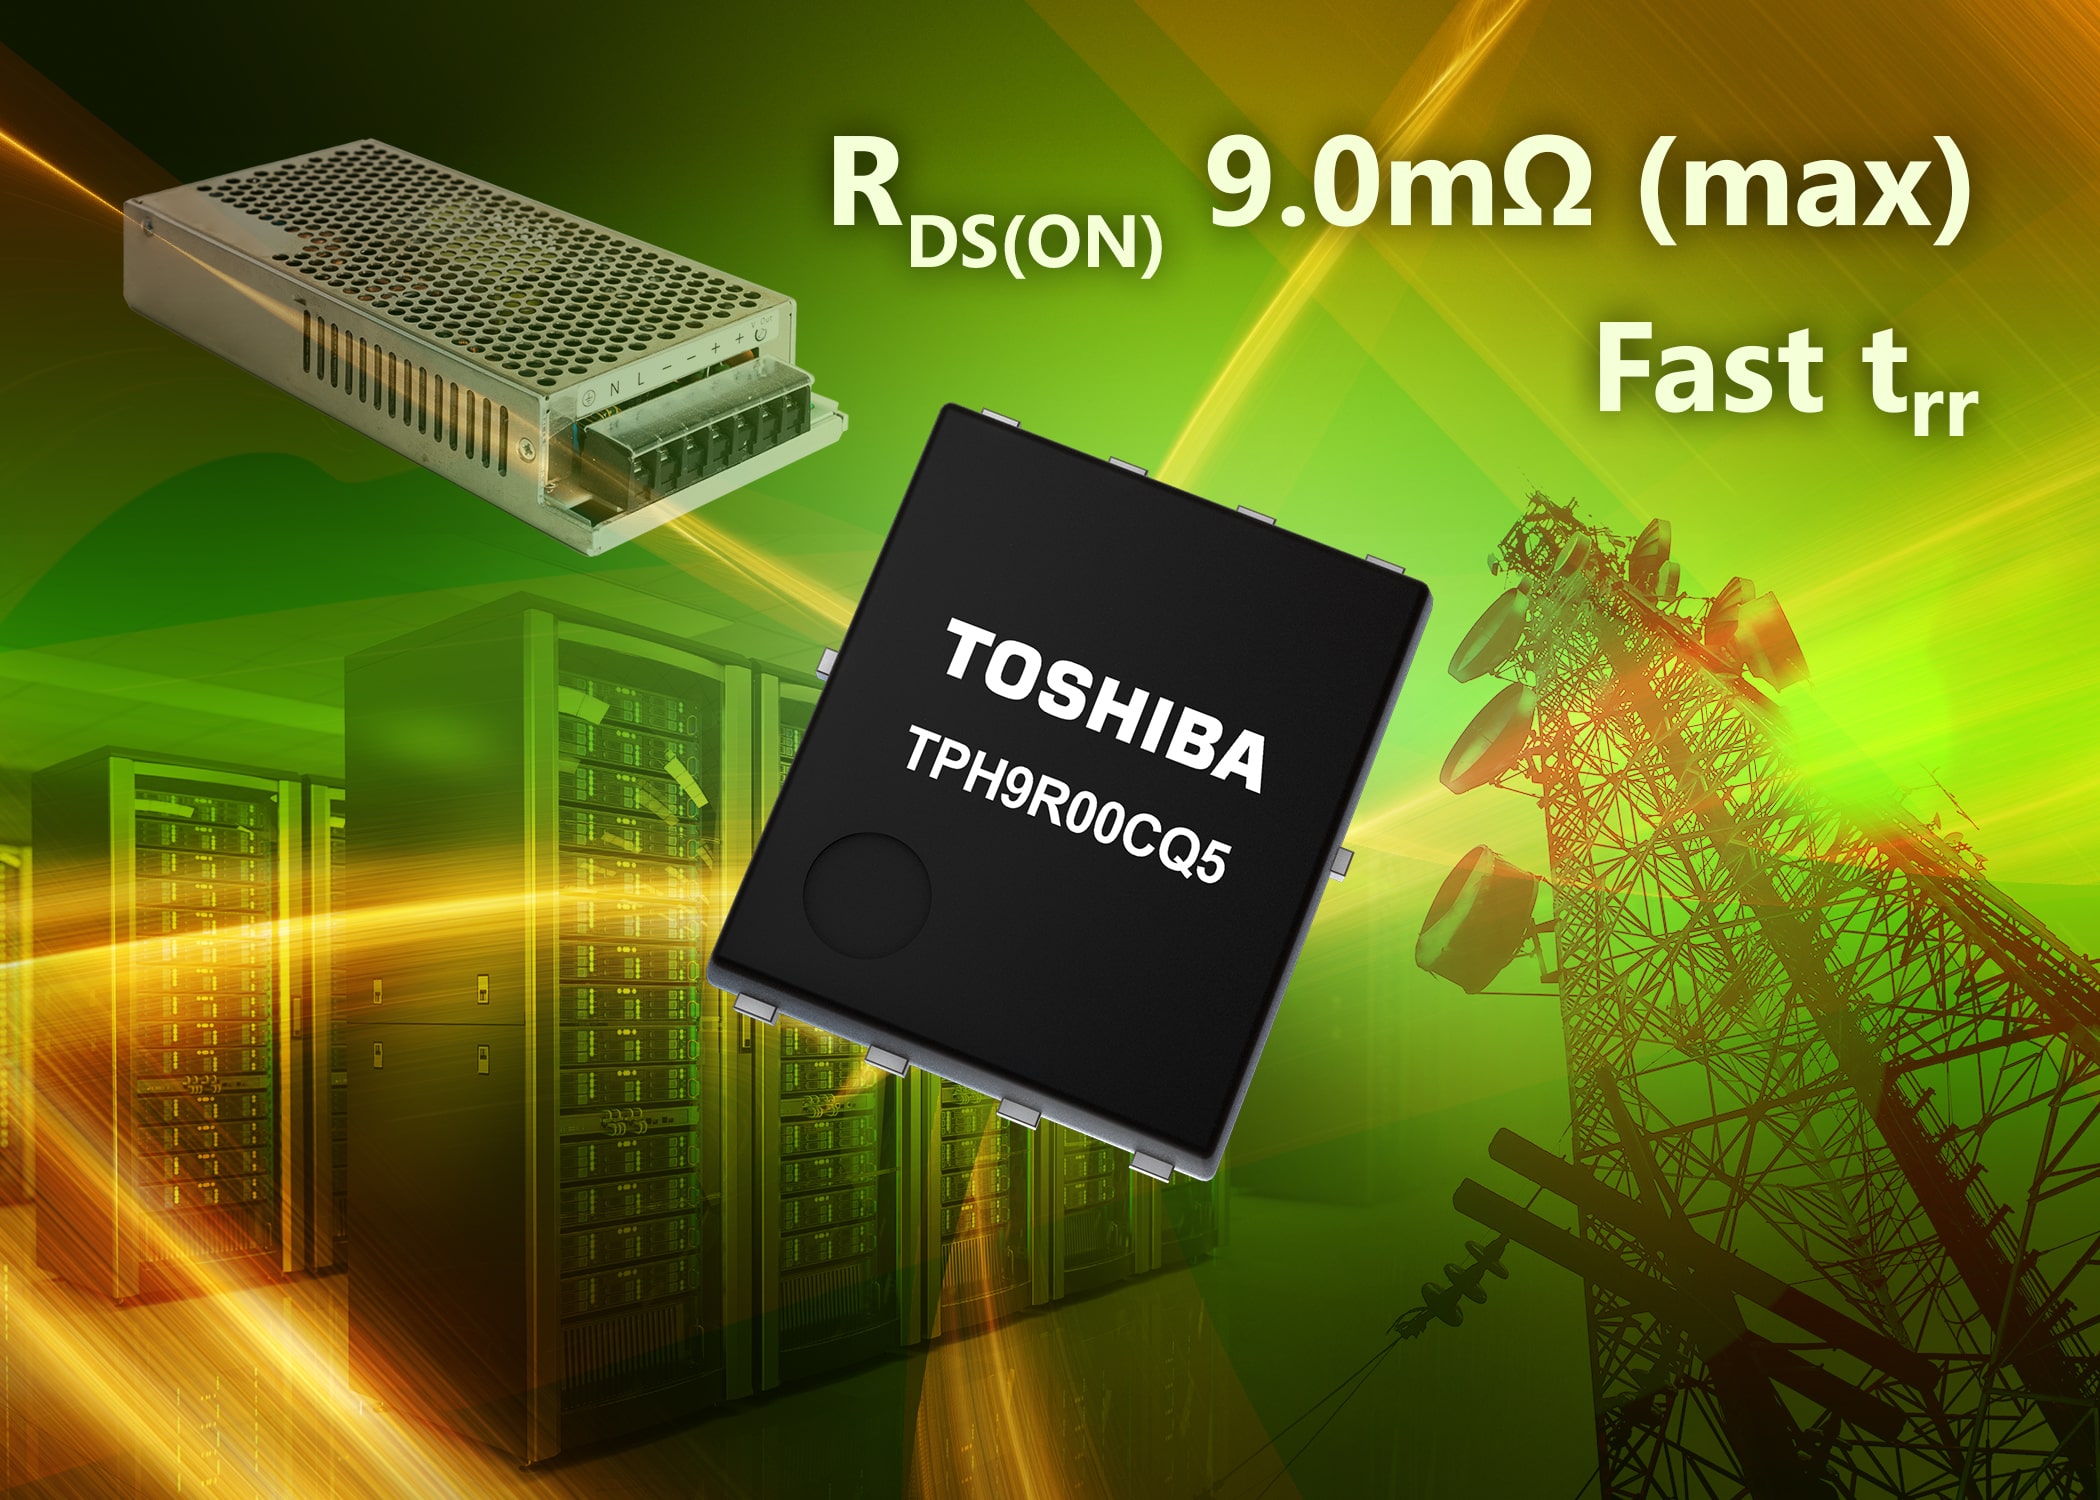 New high-performance 150V U-MOS X-H MOSFET from Toshiba